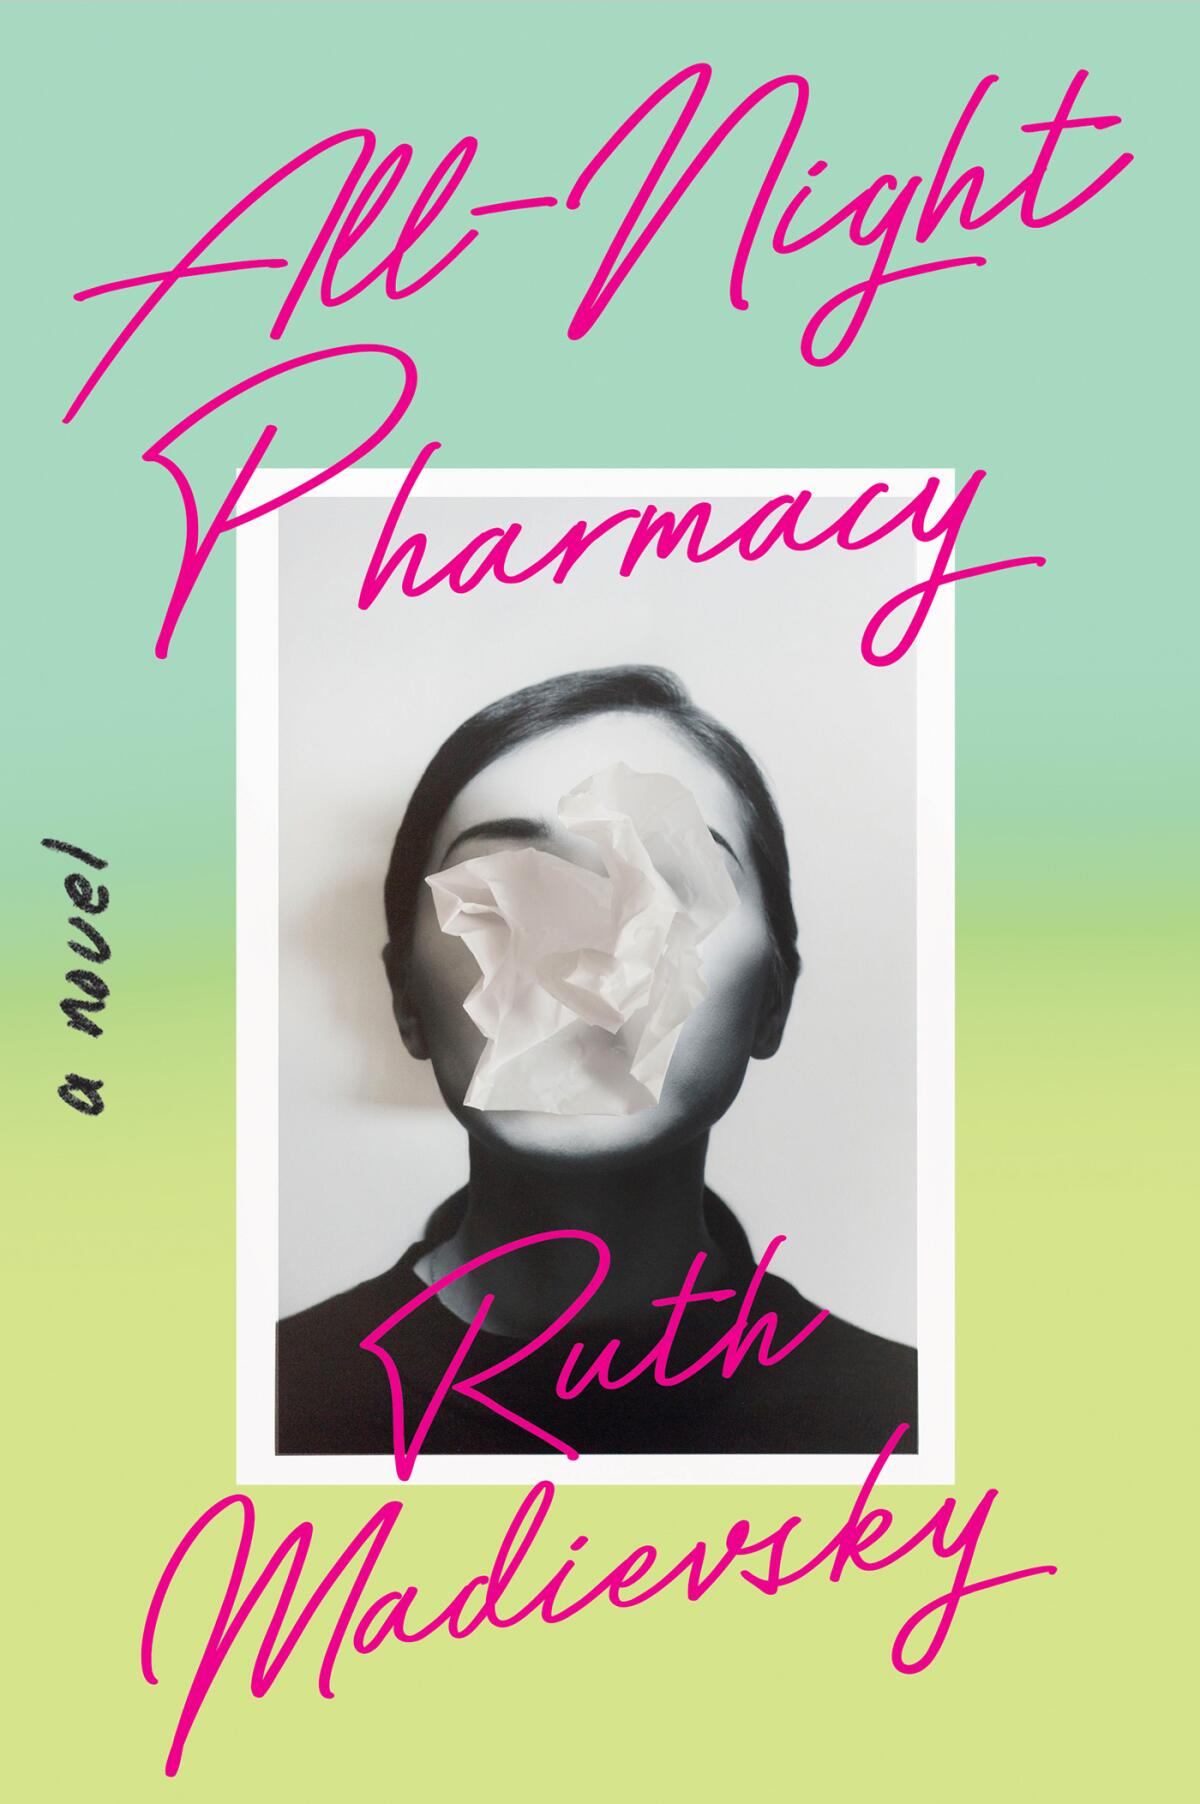 "Pharmacy open all night," by Ruth Madievsky